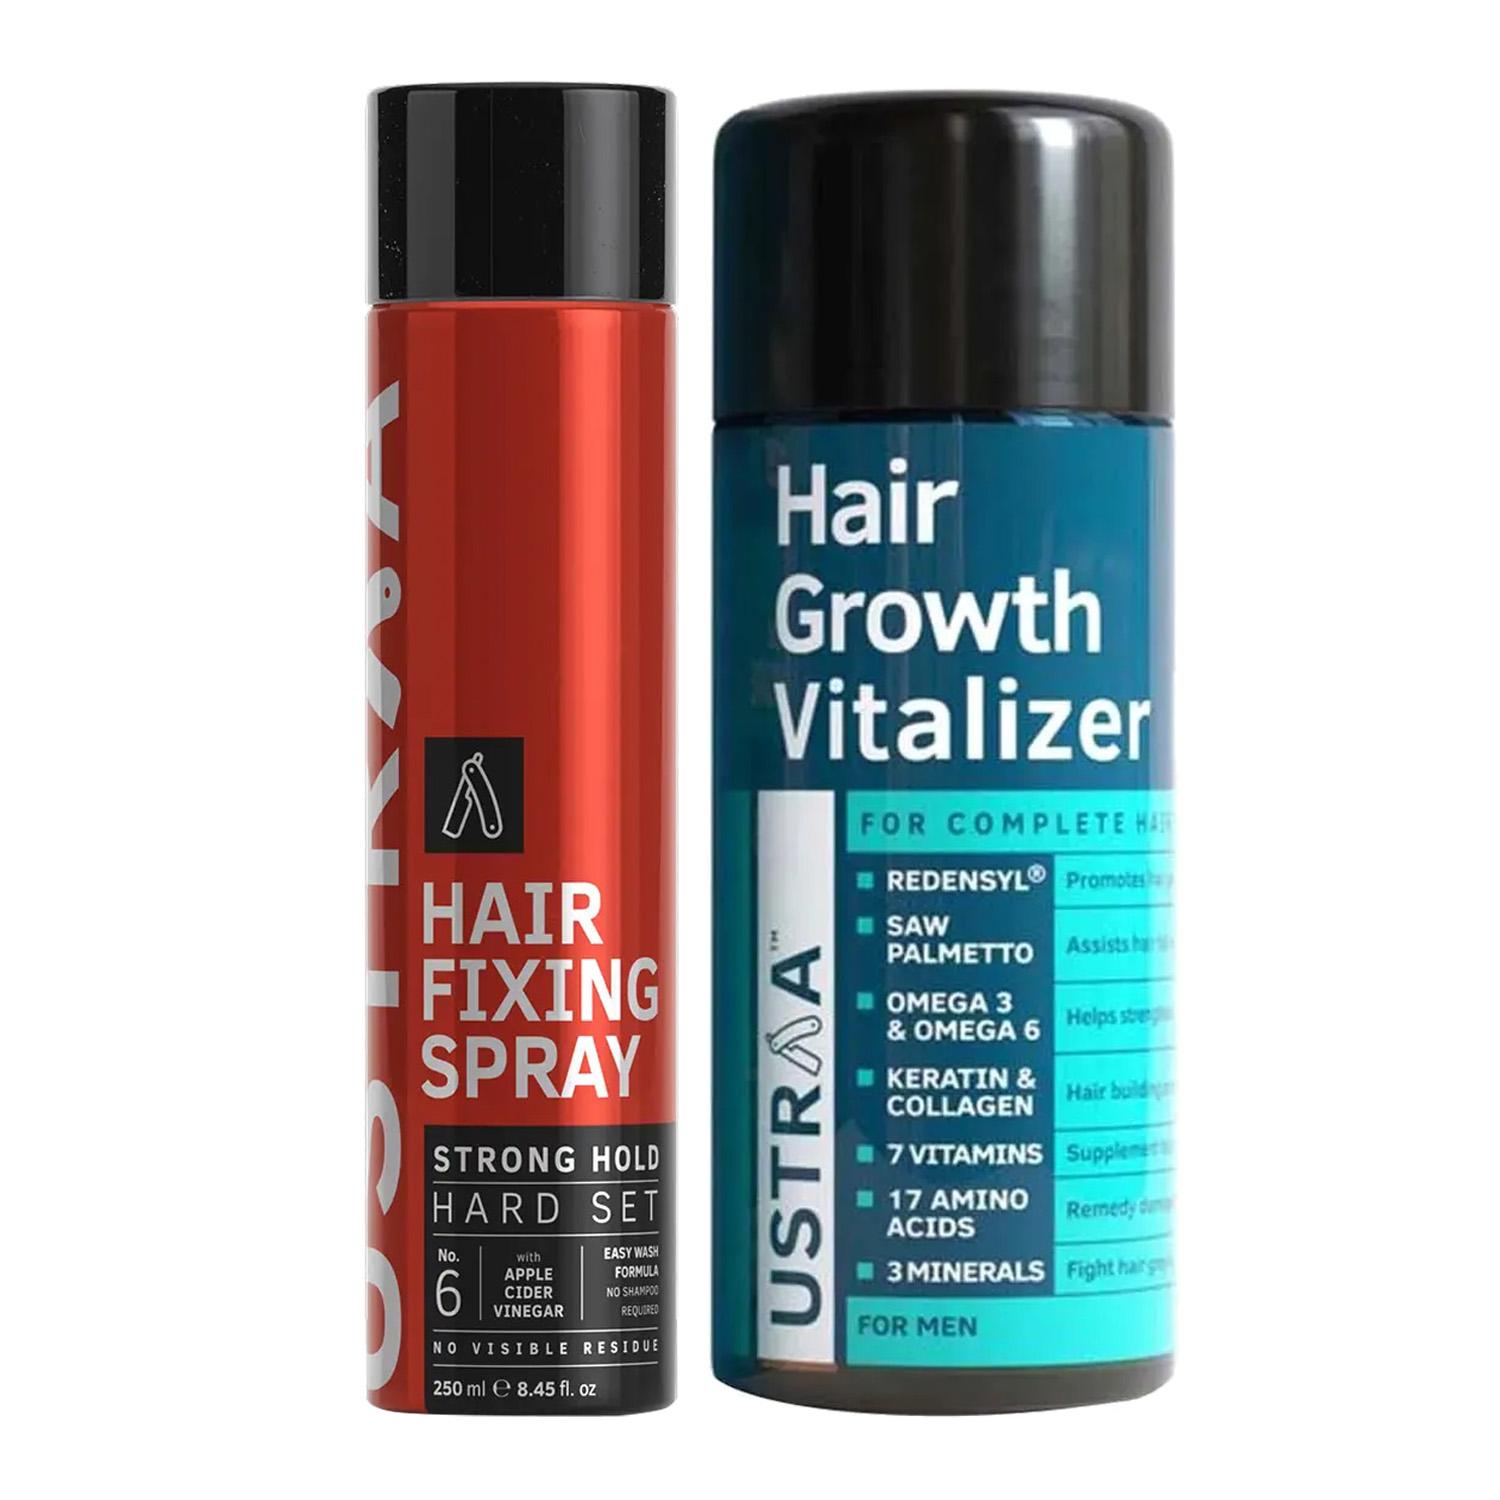 Ustraa | Ustraa Hair Fixing Spray Strong Hold Hard Set With Apple Cider Vinegar & Hair Growth Vitalizer Combo